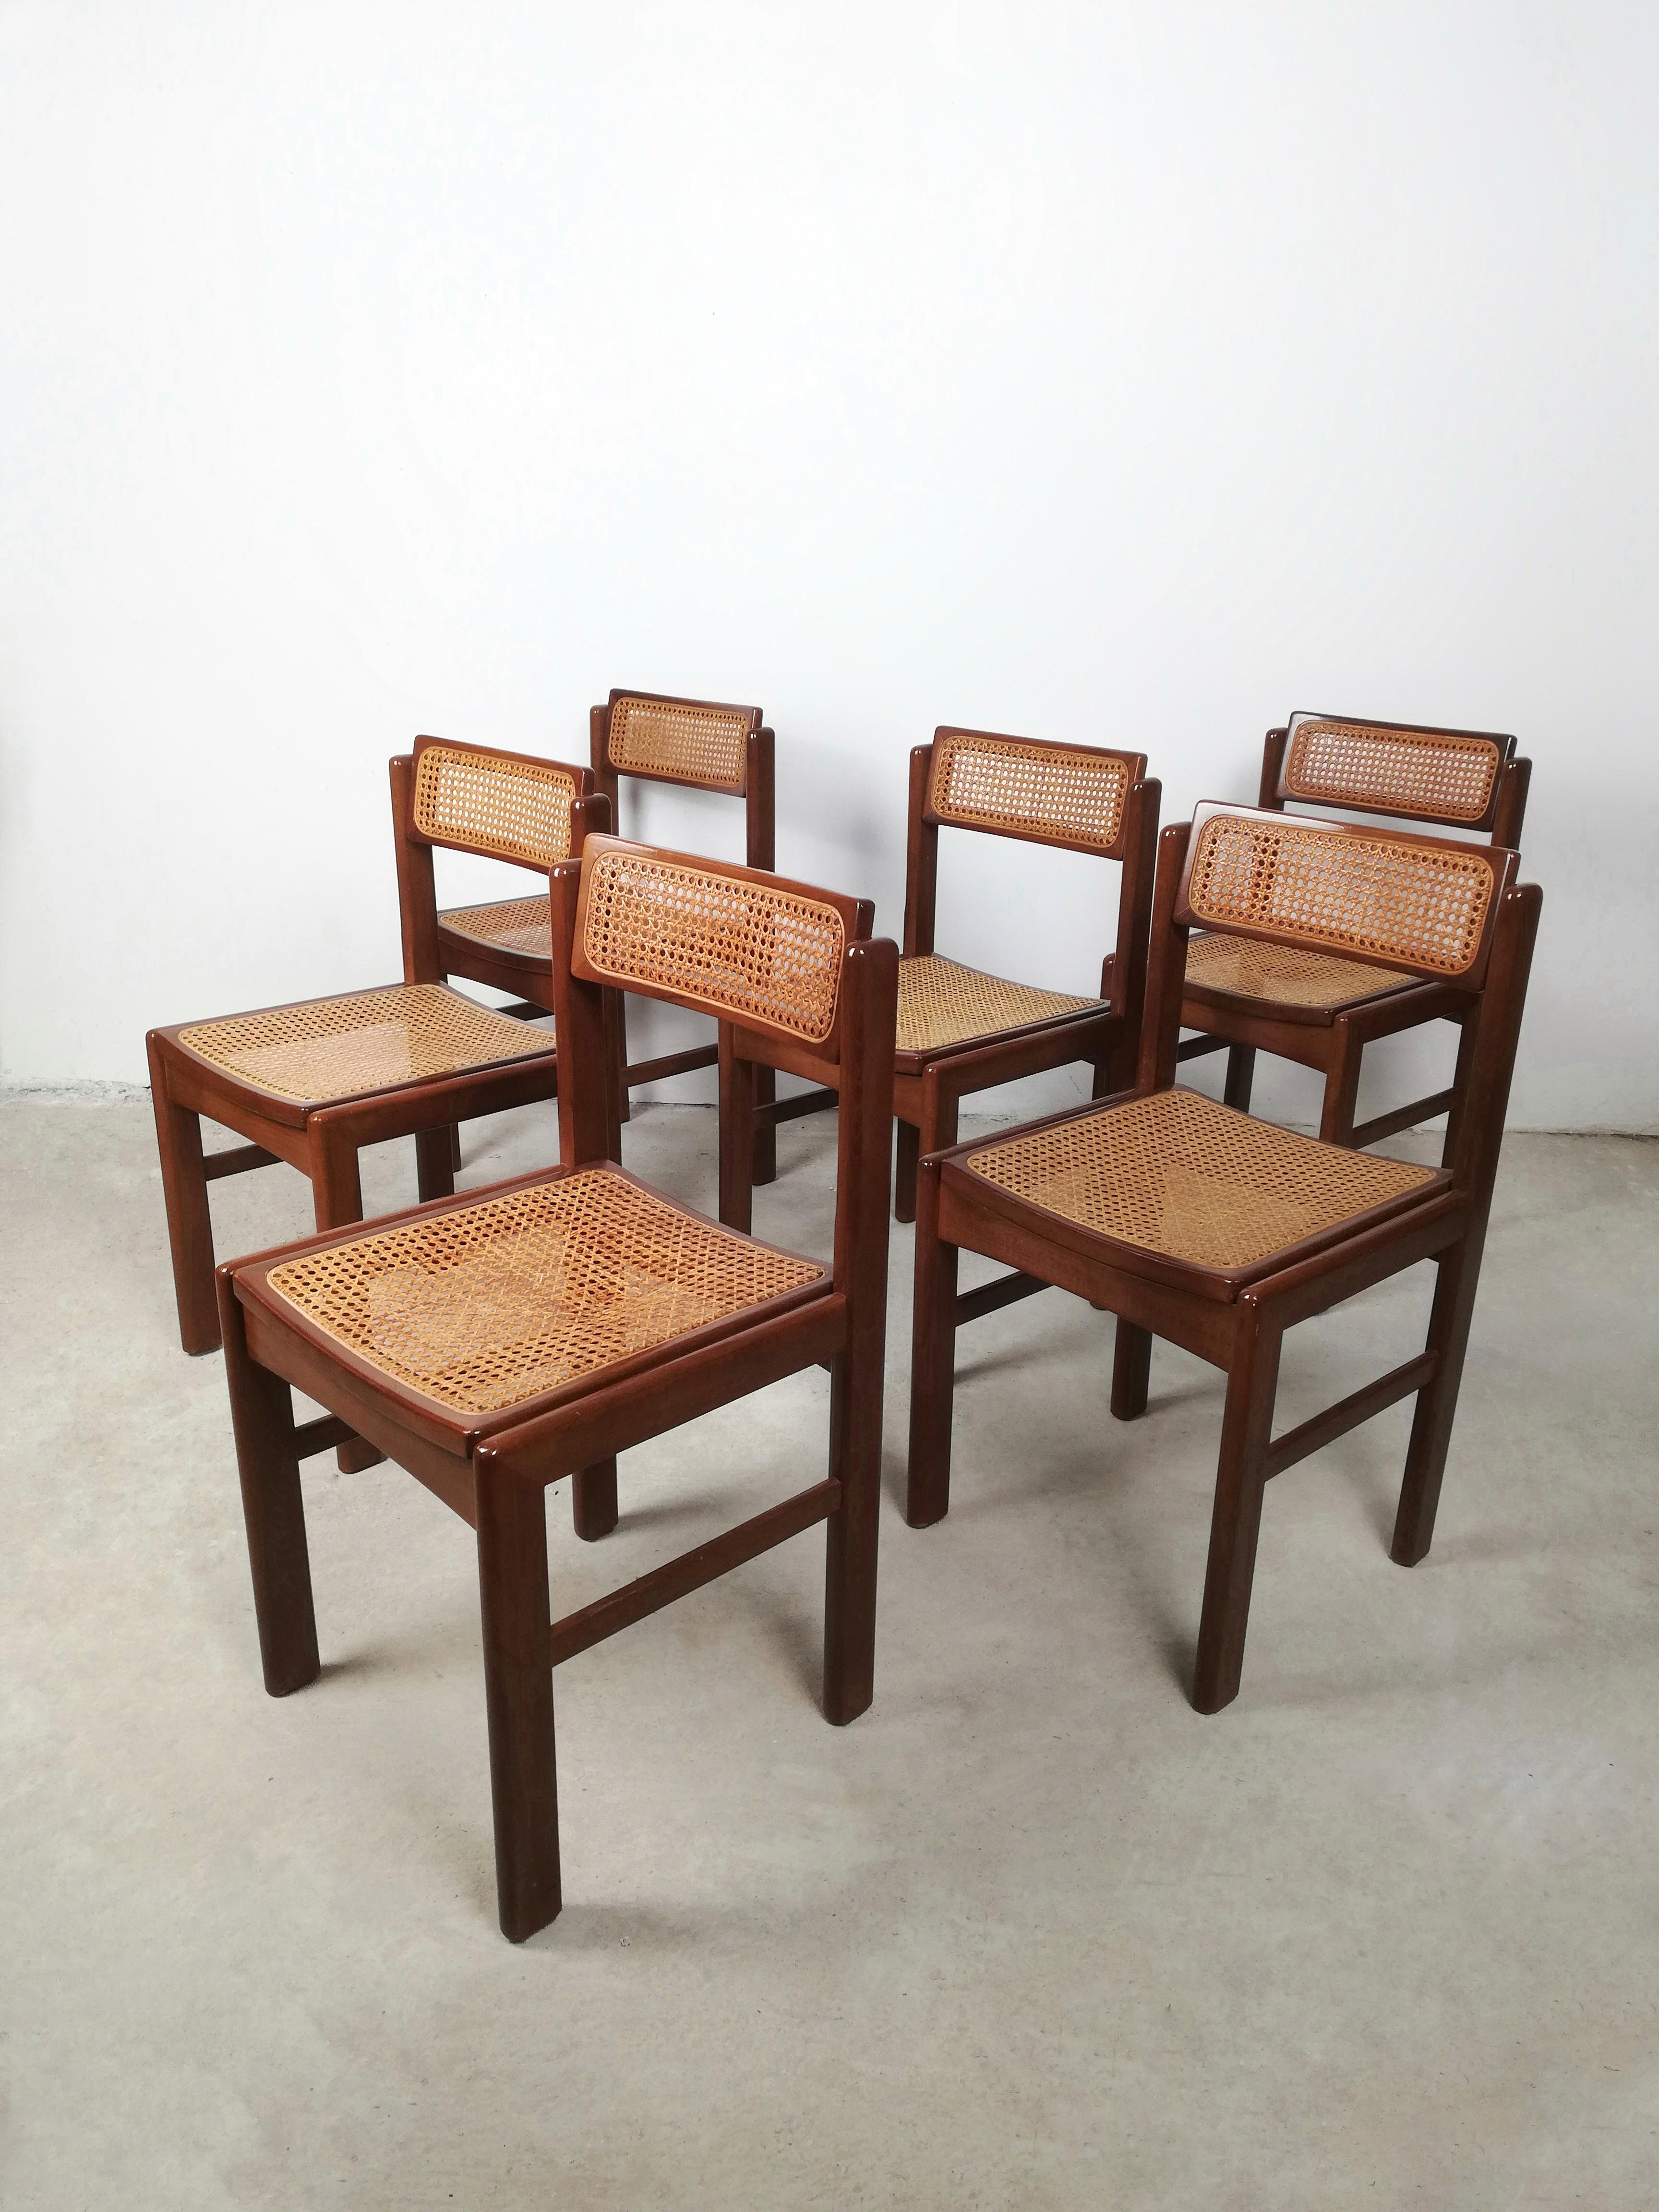 Mid-Century Modern Italian Vintage Chairs in Walnut and Natural Rattan, Italy 1970s